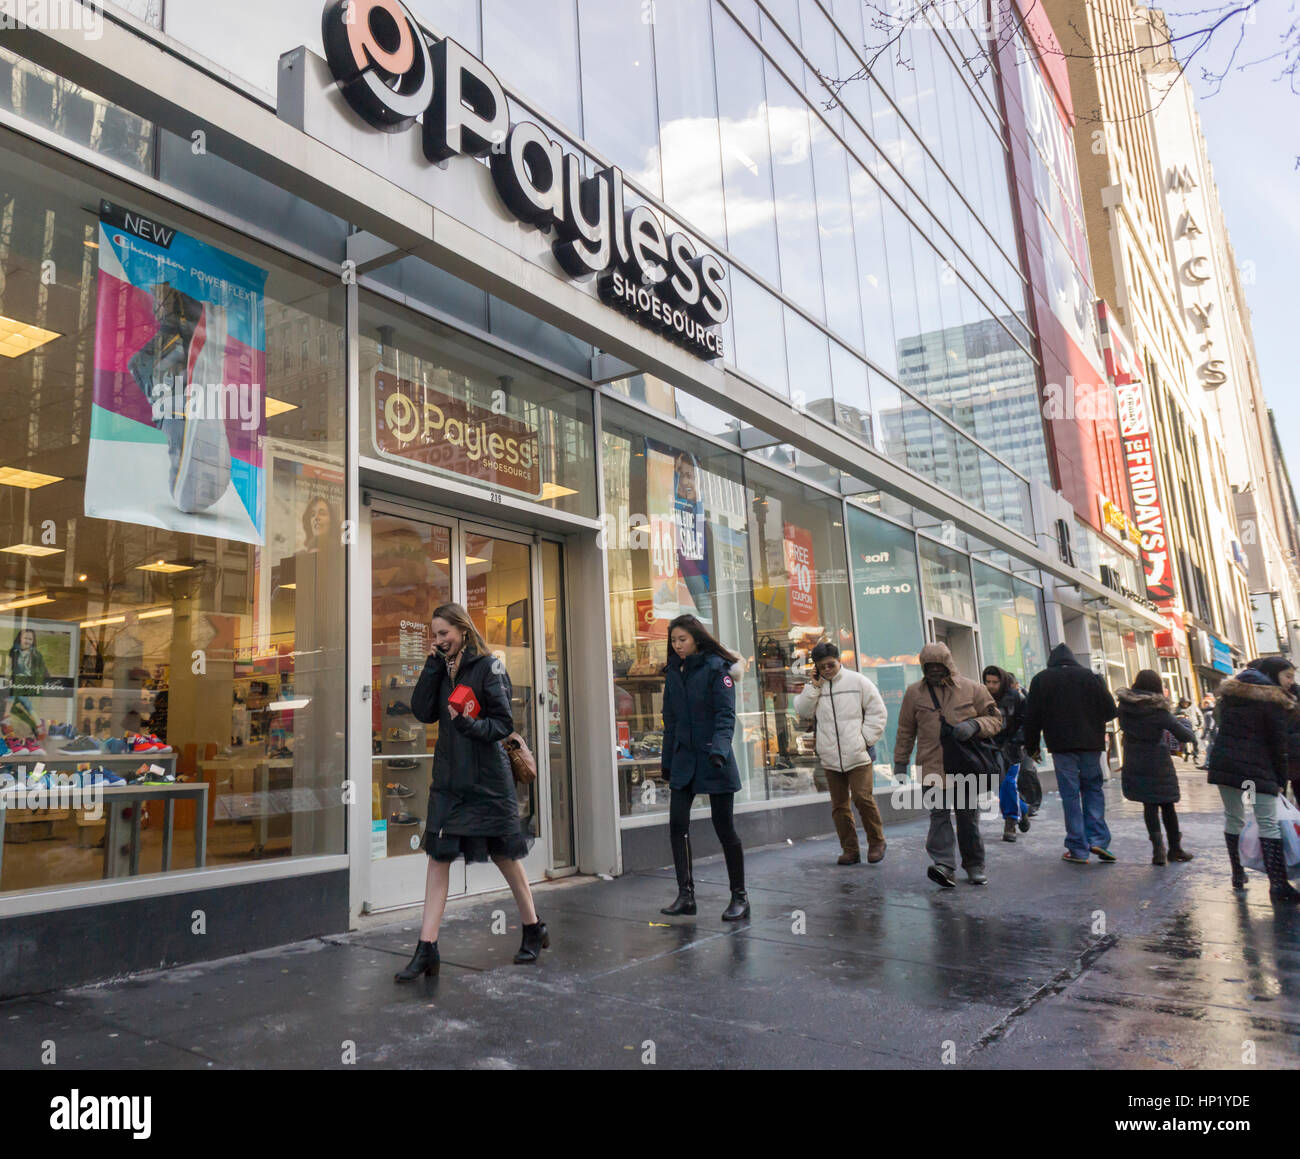 A Payless ShoeSource store in New York on Friday, February 10, 2017. Payless is reported to be in talks with lenders about a restructuring plan which may include closing up to 1000 stores or a possible bankruptcy. (© Richard B. Levine) Stock Photo